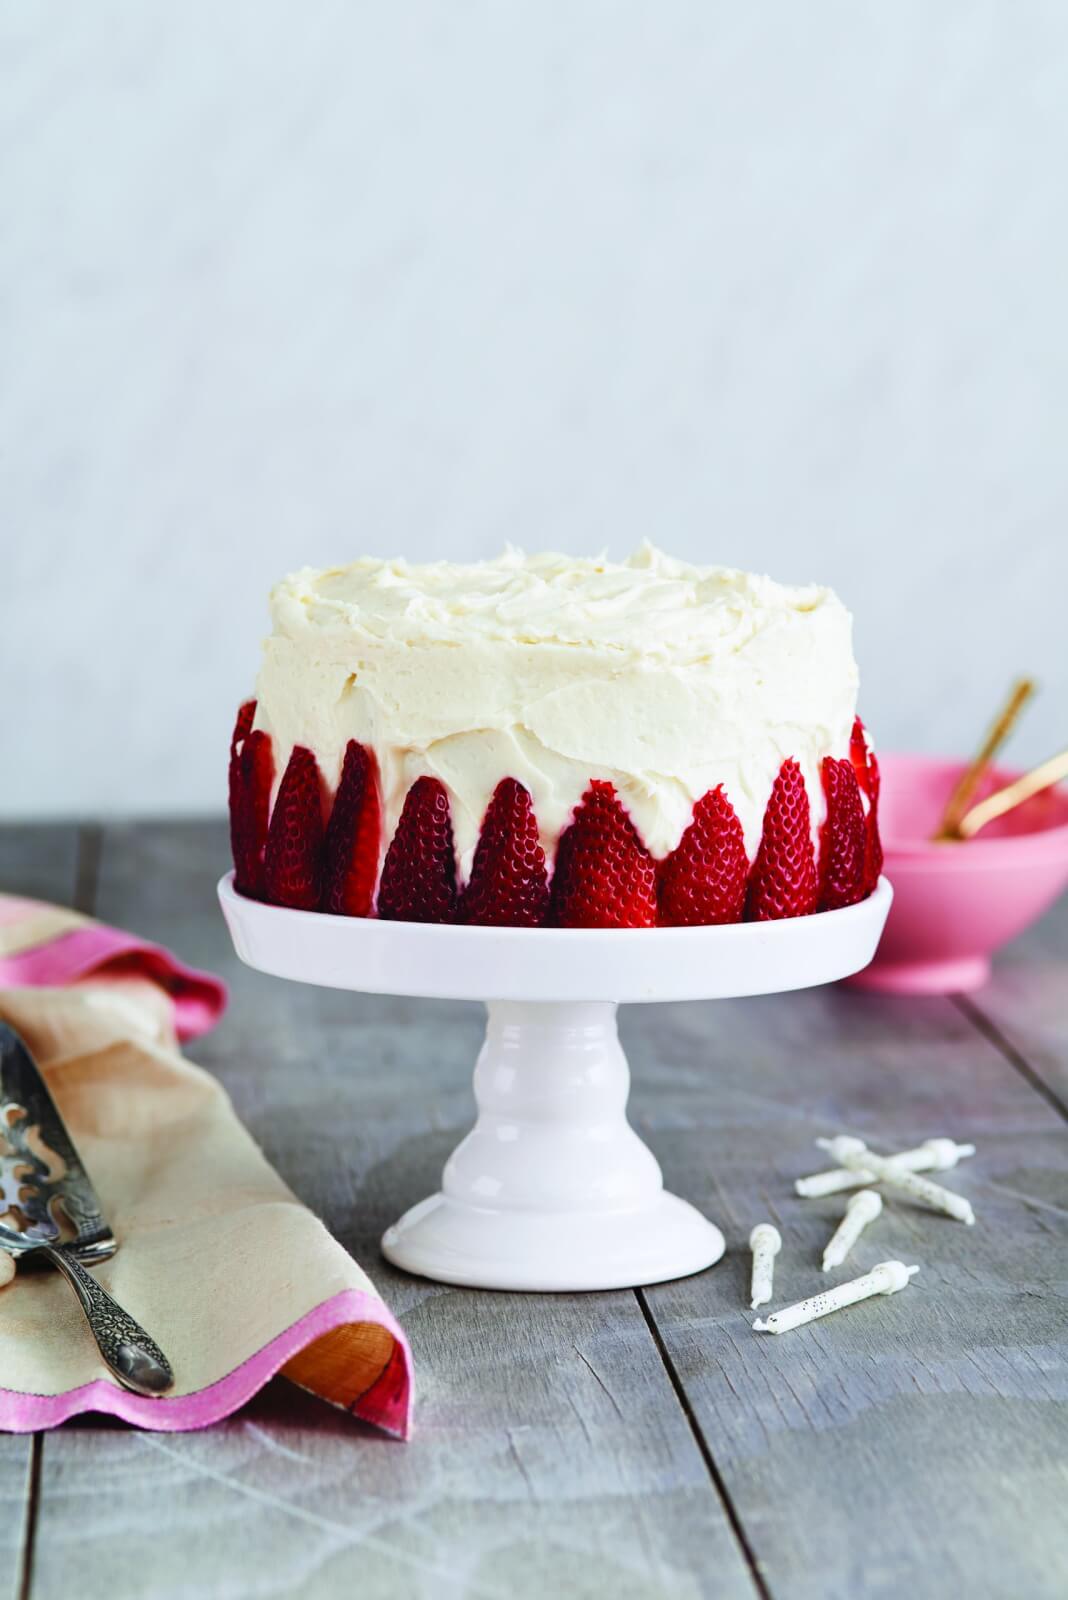 Small white cake with sliced strawberries on the side, sitting on a white cakestand.